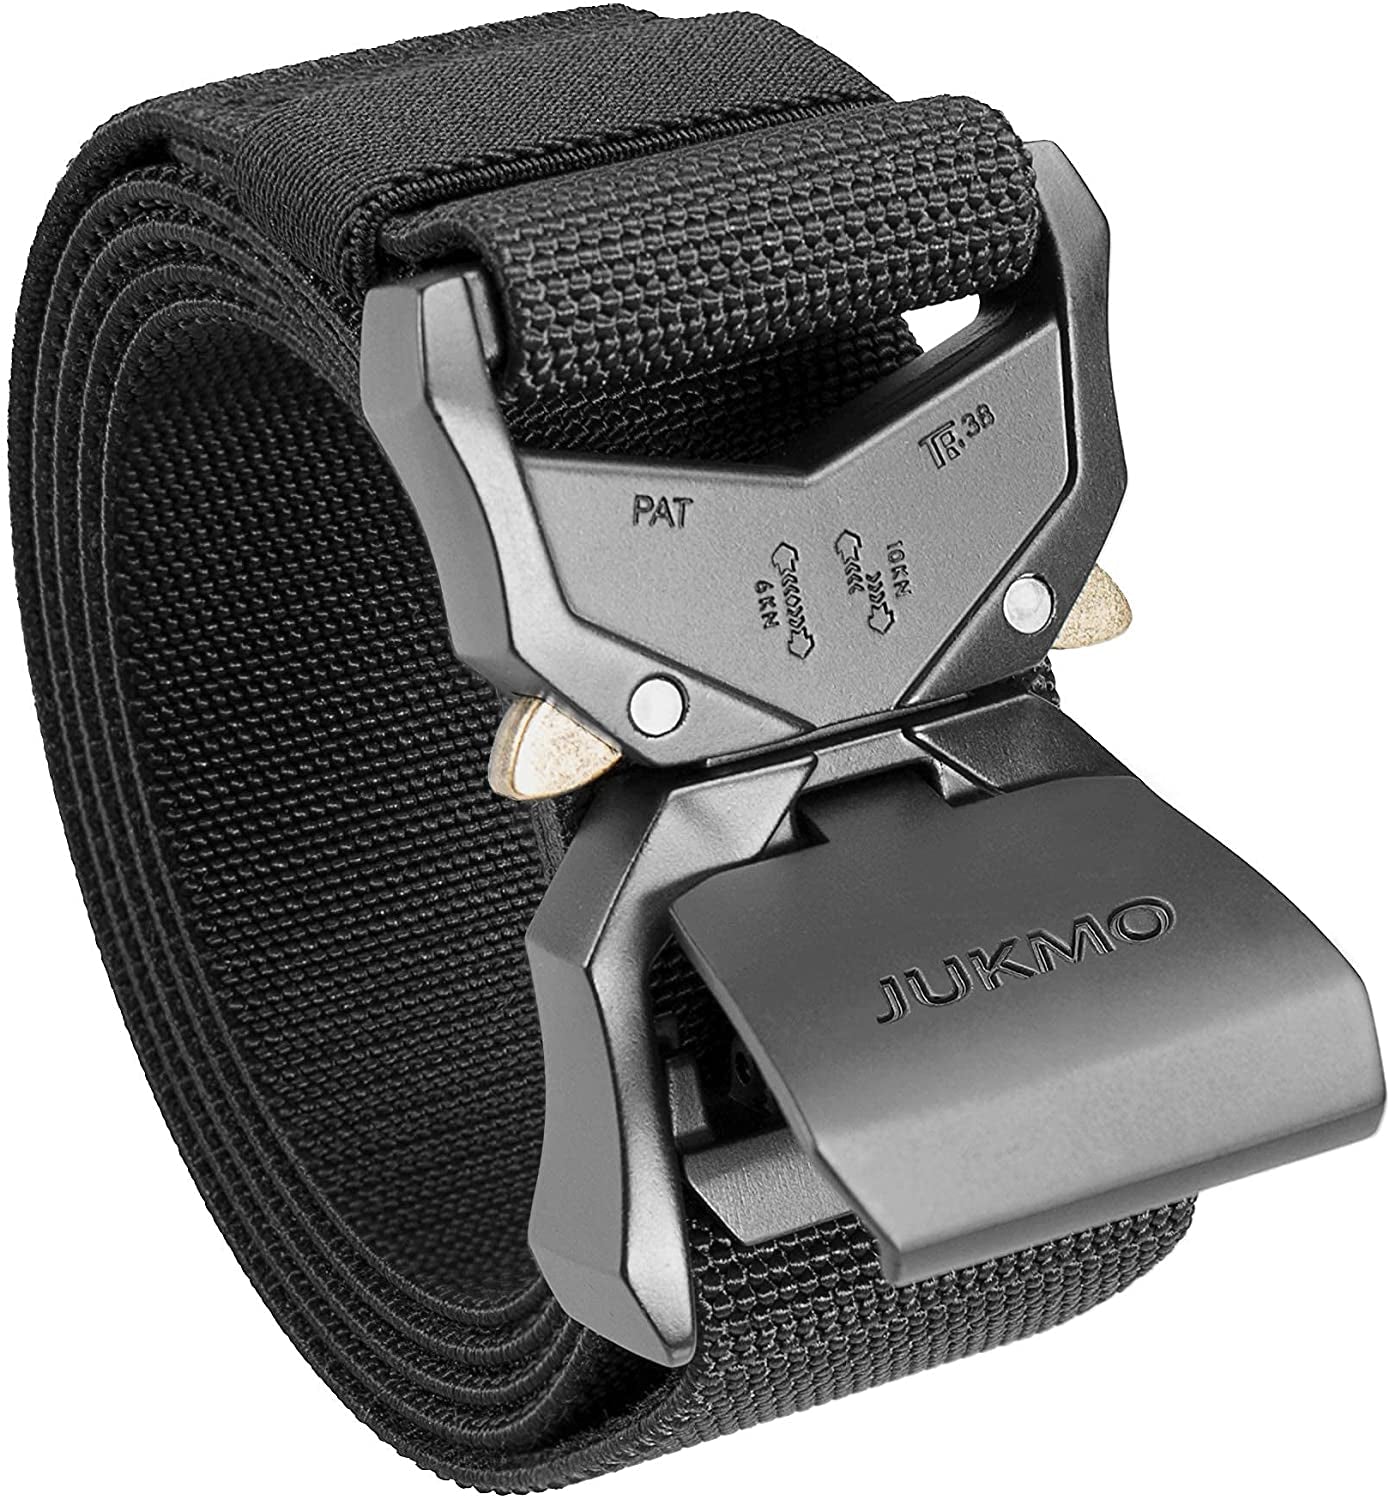 JUKMO Tactical Belt, Military Hiking Rigger 1.5" Nylon Web Work Belt with Heavy Duty Quick Release Buckle Animals & Pet Supplies > Pet Supplies > Dog Supplies > Dog Apparel JUKMO Black Small-for Waist 30"-36" (Length 45") 